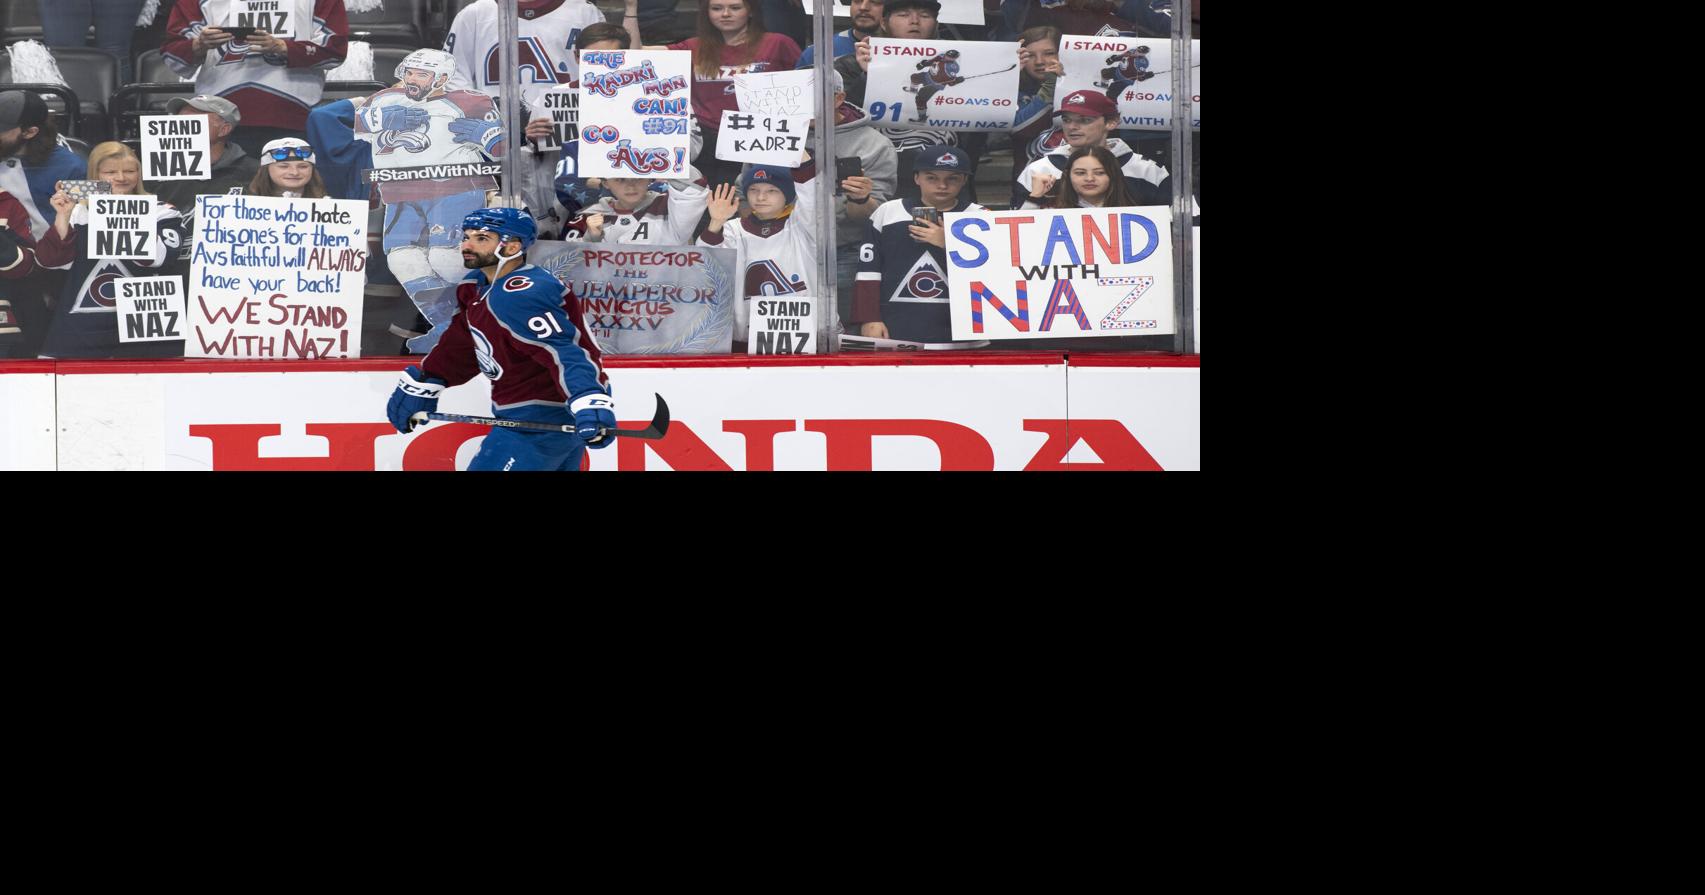 Fans stand with Nazem Kadri as Avalanche return to Colorado for Game 5, Avalanche